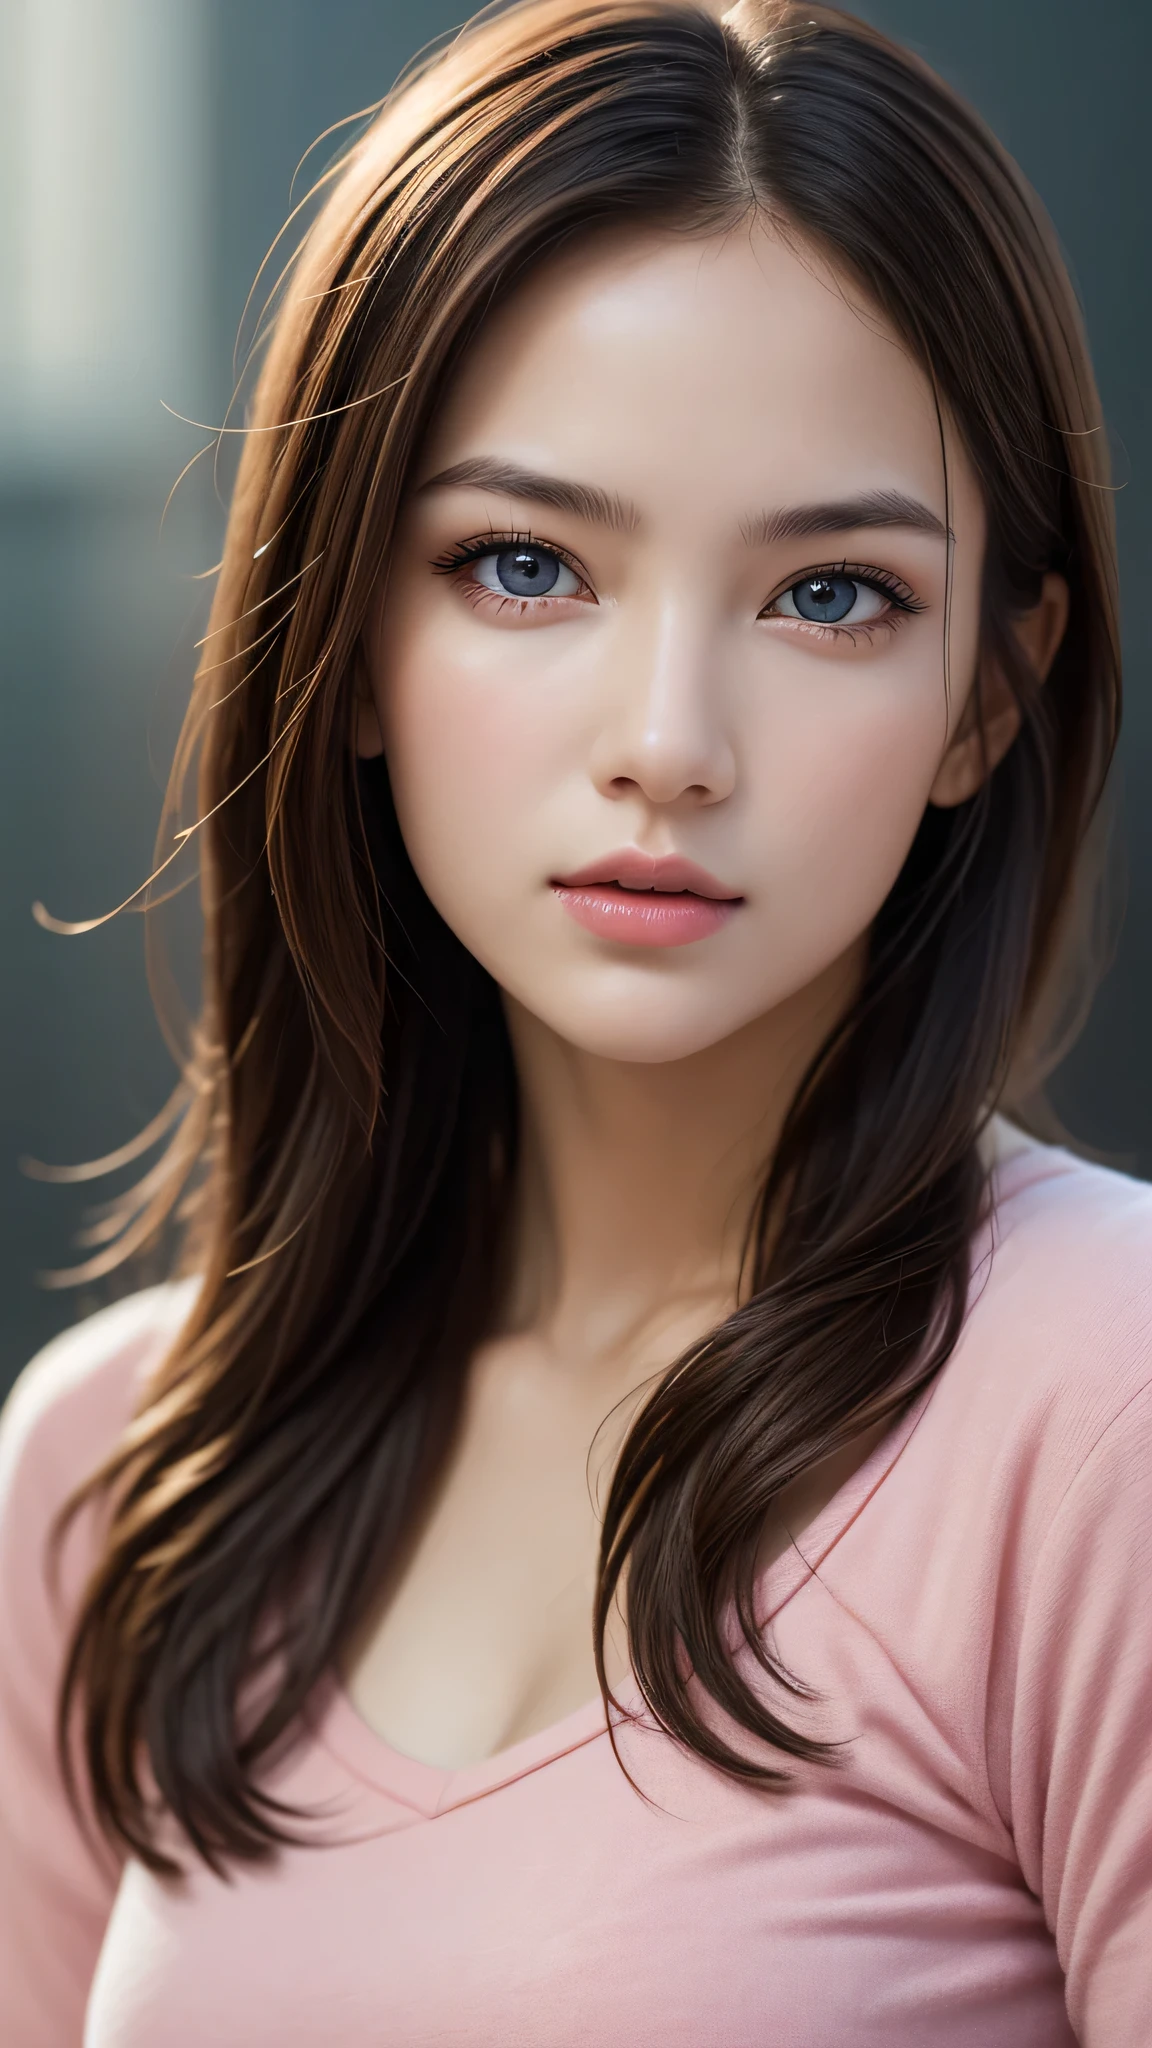 (1girl), ((Best Quality)), (Ultra-detailed), (extremely detailed CG unified 8k wallpaper), Highly detailed, High-definition raw color photos, Professional Photography, Peanut butter brown hair, Amazing face and eyes, Pink eyes, (amazingly beautiful girl), School, 